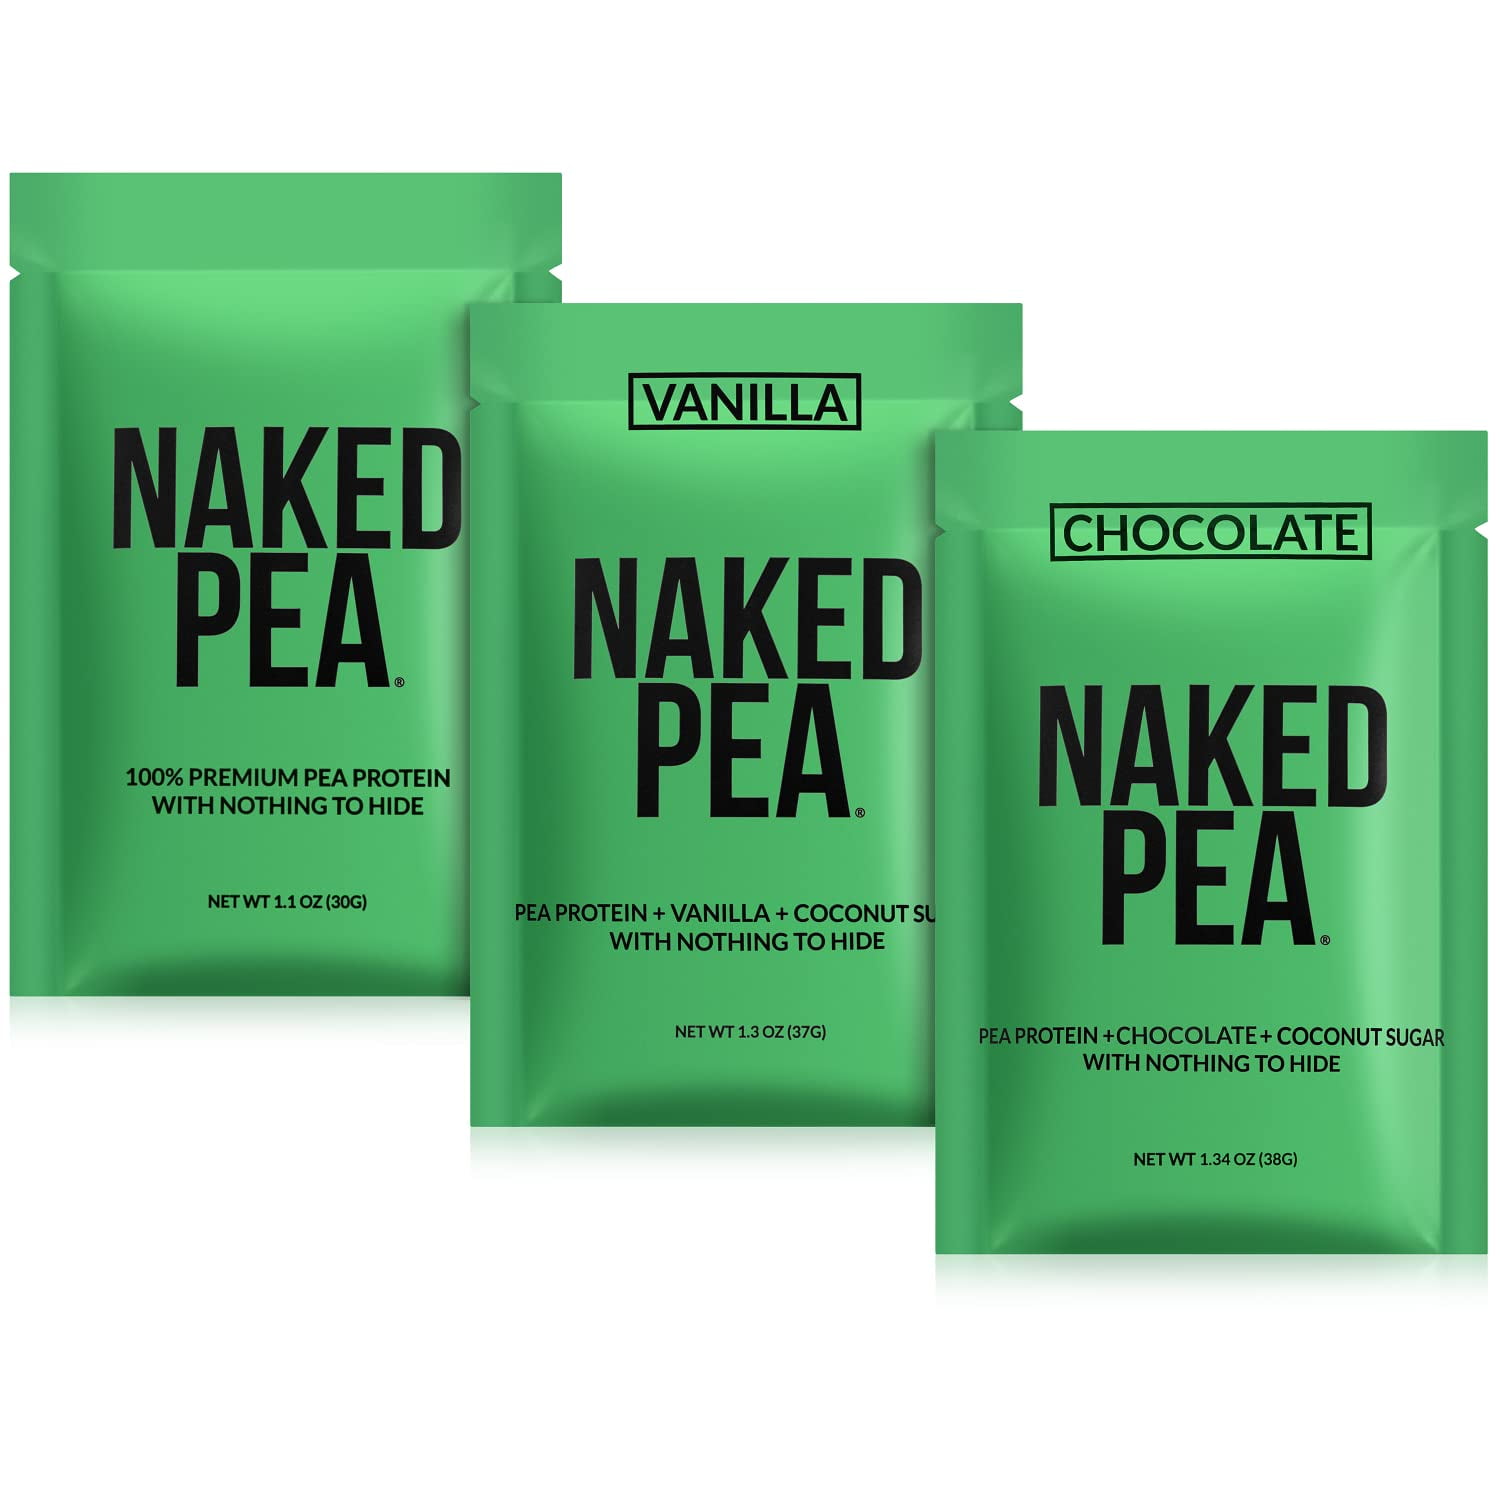 Naked Nutrition Vegan Sample Pack - Naked Pea, Chocolate Naked Pea, and  Vanilla Naked Pea